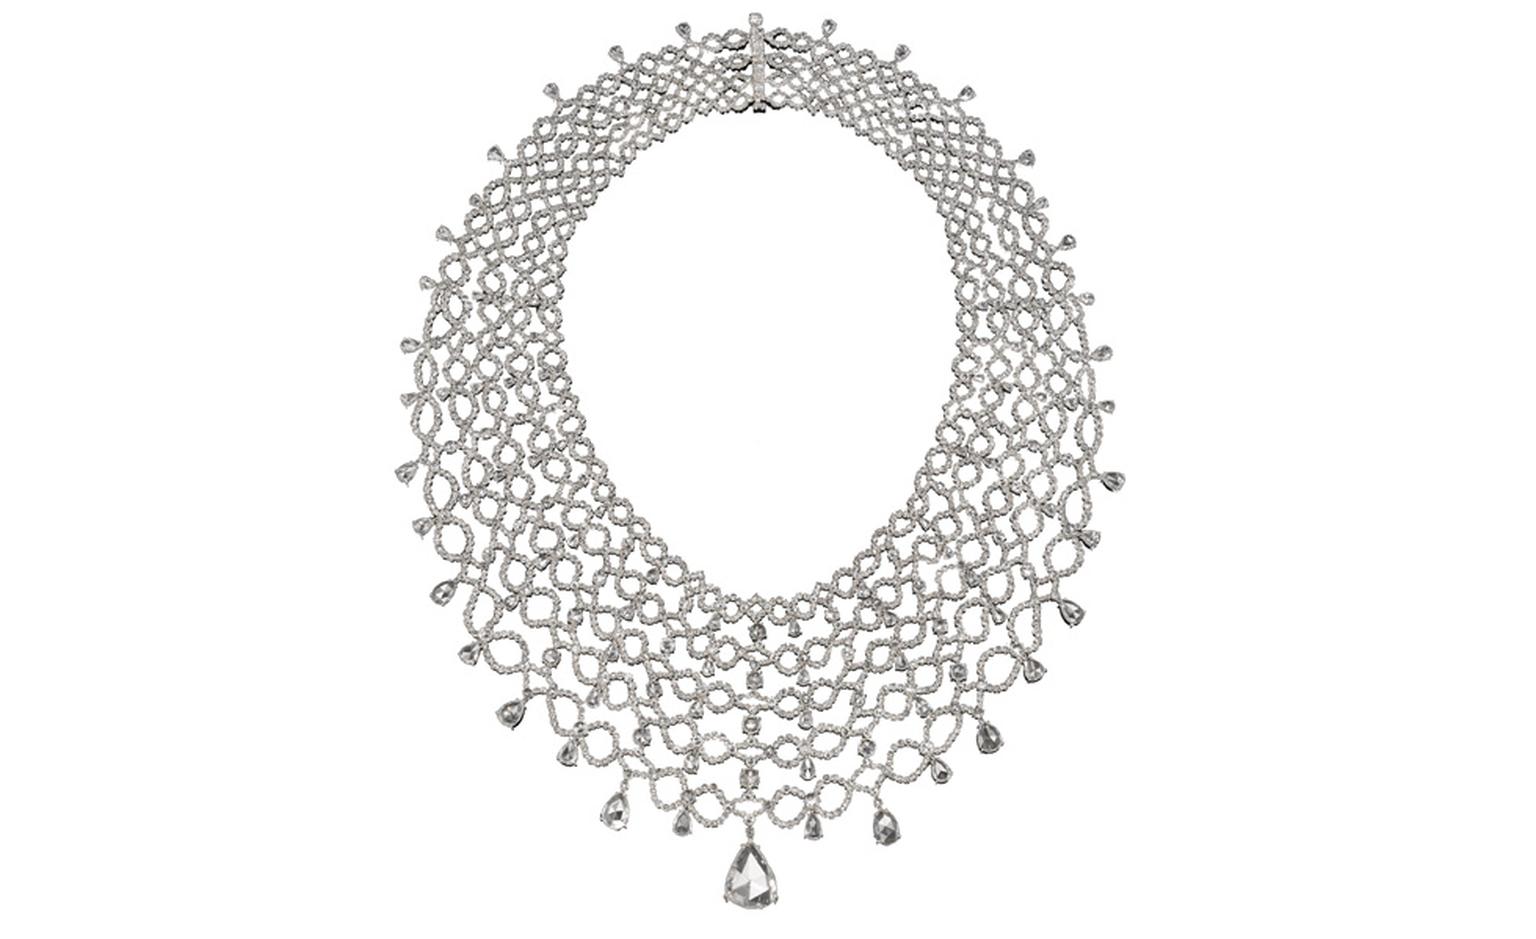 Dream lace necklace: Michelle Ong's most exacting levels of craftmanship make gold and diamonds as supple as fabric.